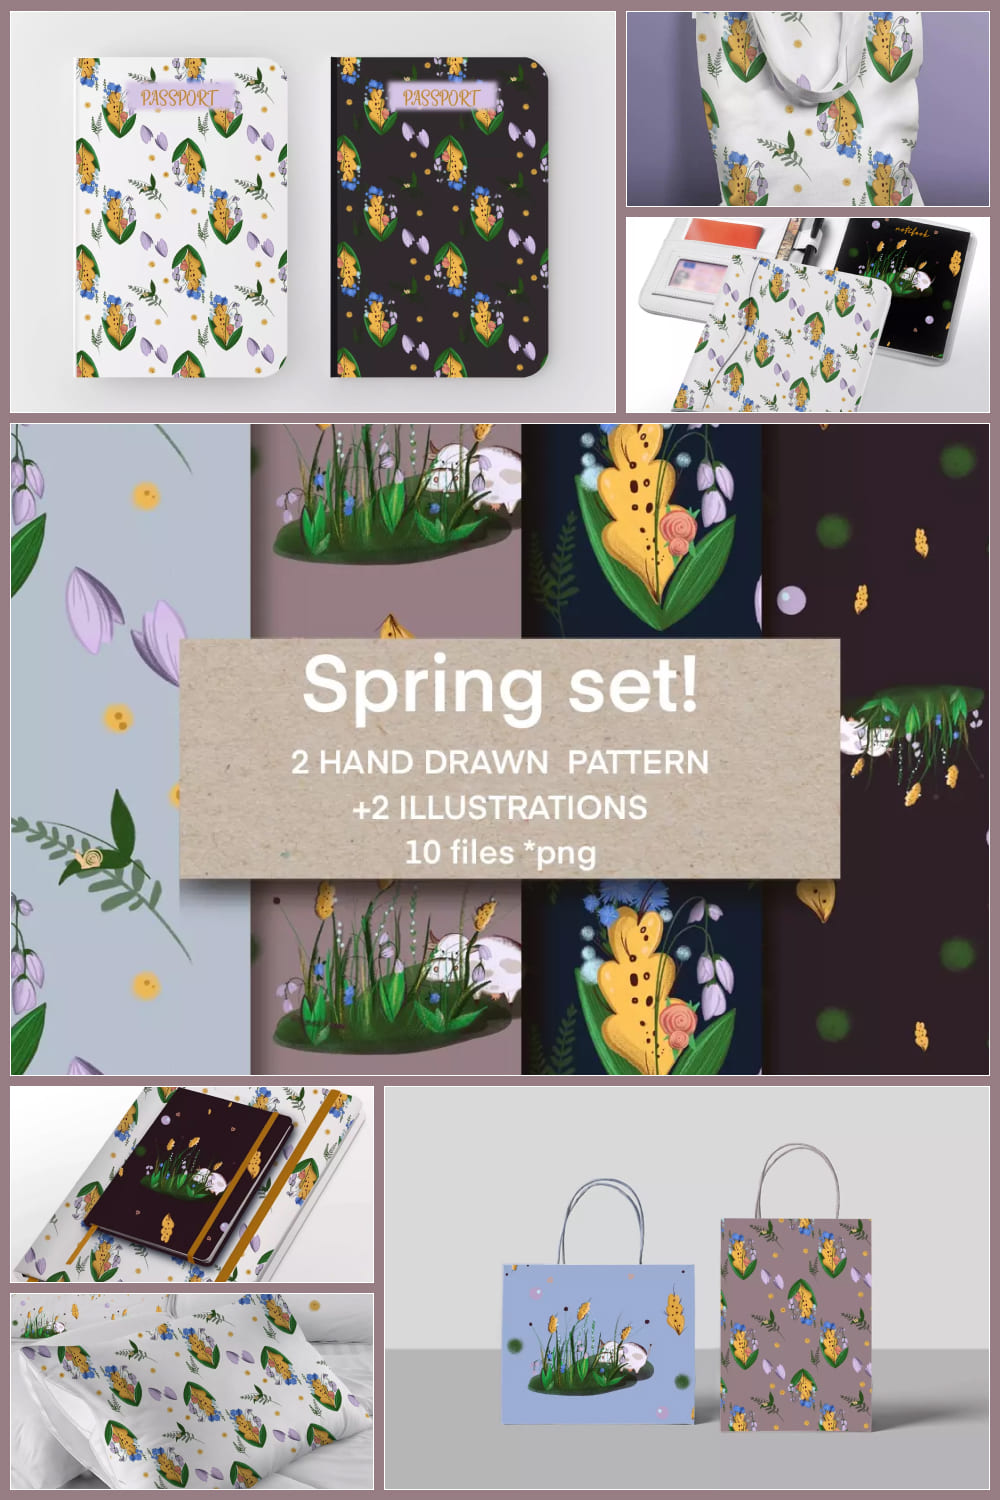 Collage with goods with spring flower patterns on them.